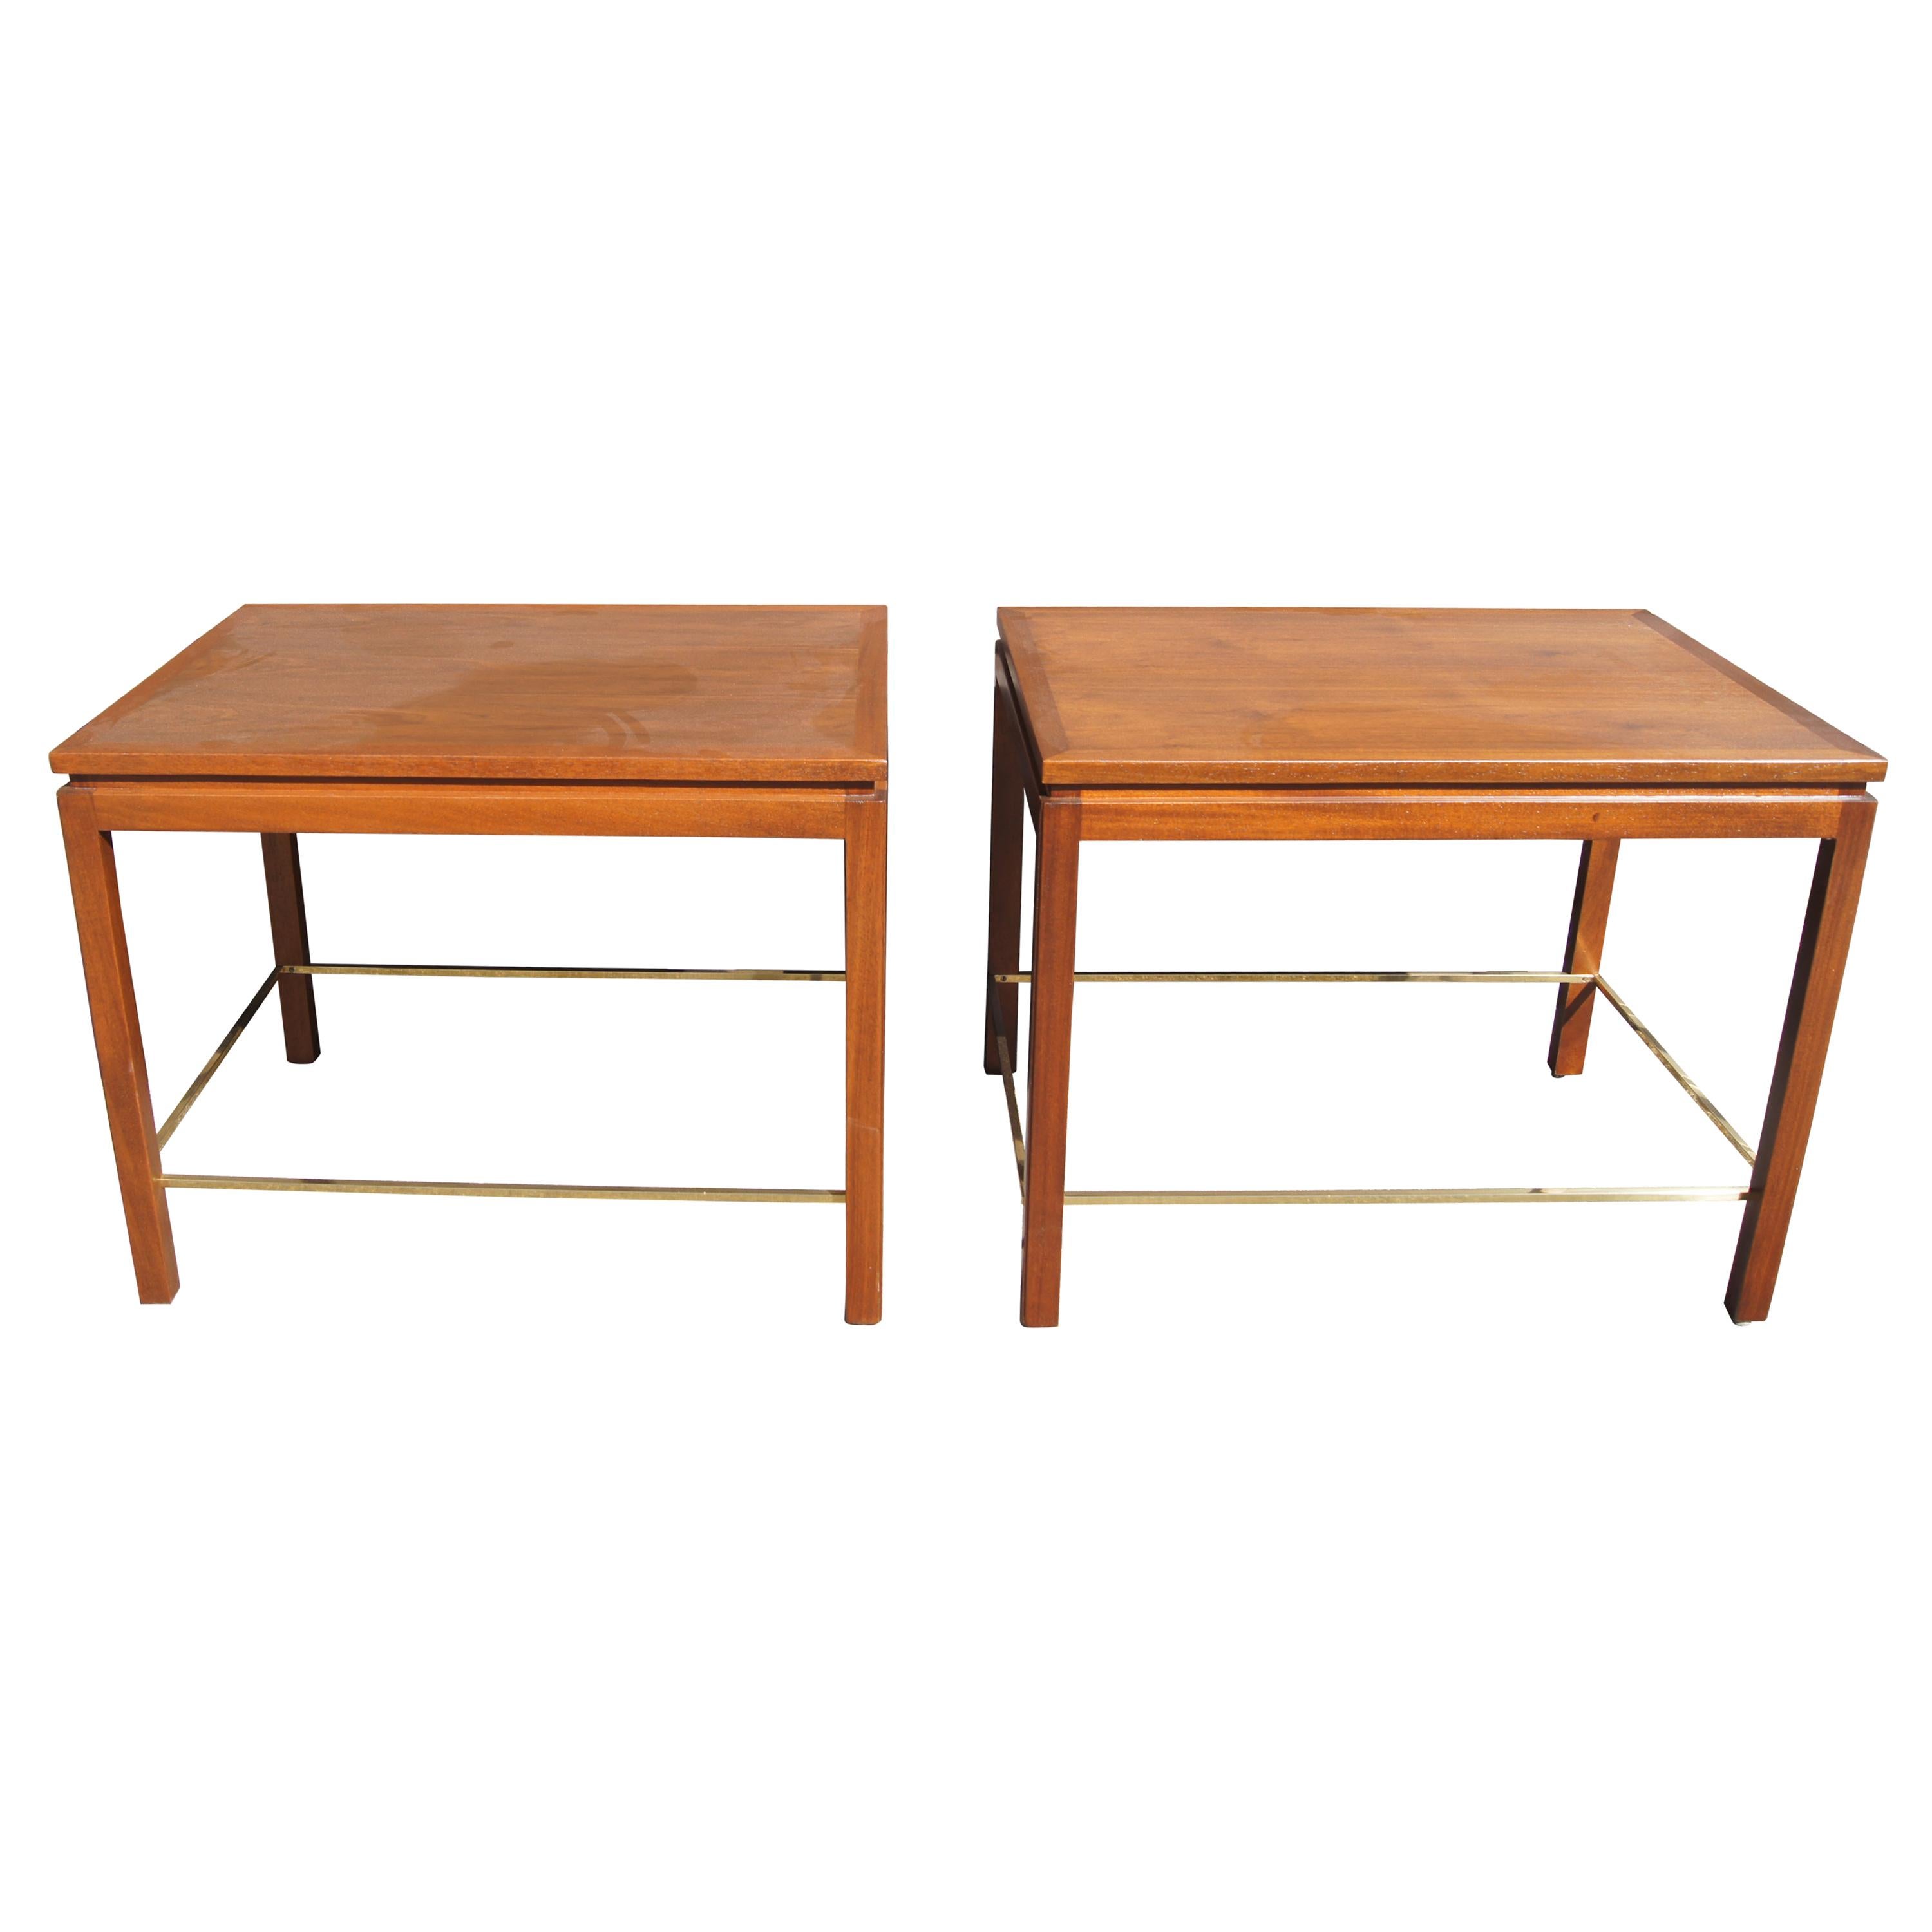 Pair of Mahogany, Walnut, and Brass Side Tables by Edward Wormley for Dunbar